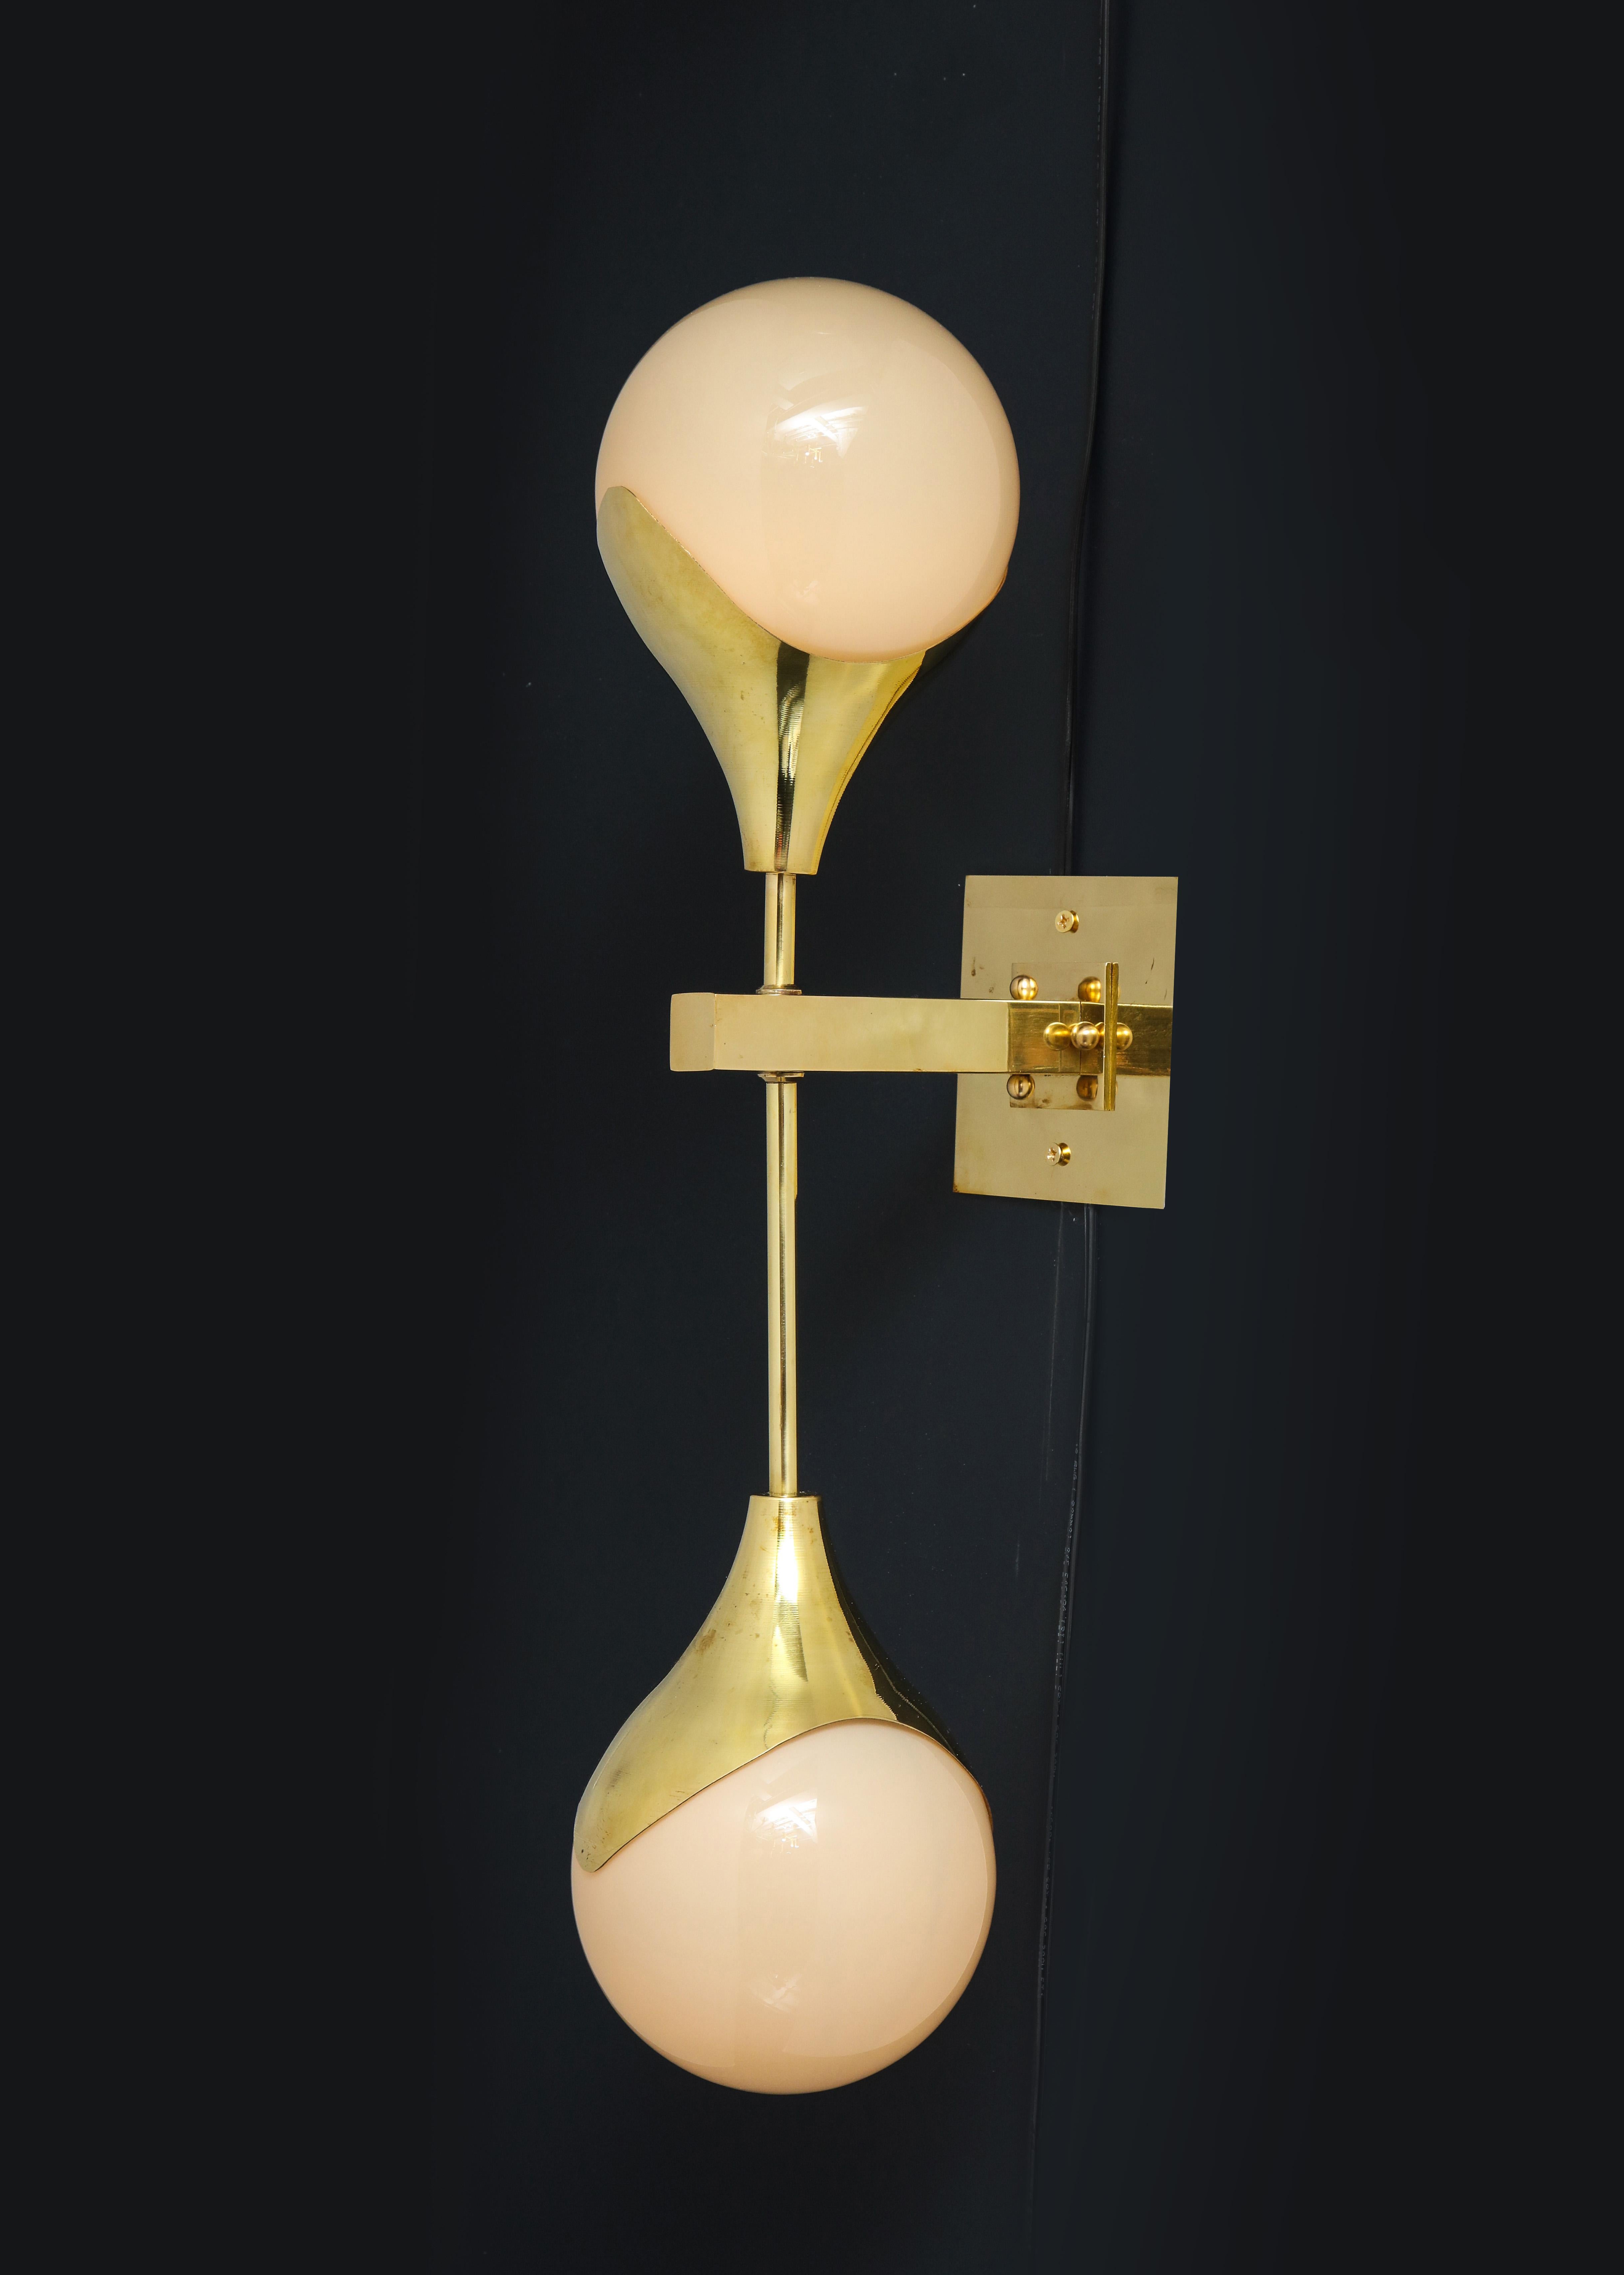 Pair of unique dumbbell-shaped brass sconces with Murano white glass globes and brass plates. Sconces can be installed with long arm up or down (your preference). Wired for U.S. standards. Each light holds two candelabra-base bulbs. This pair of